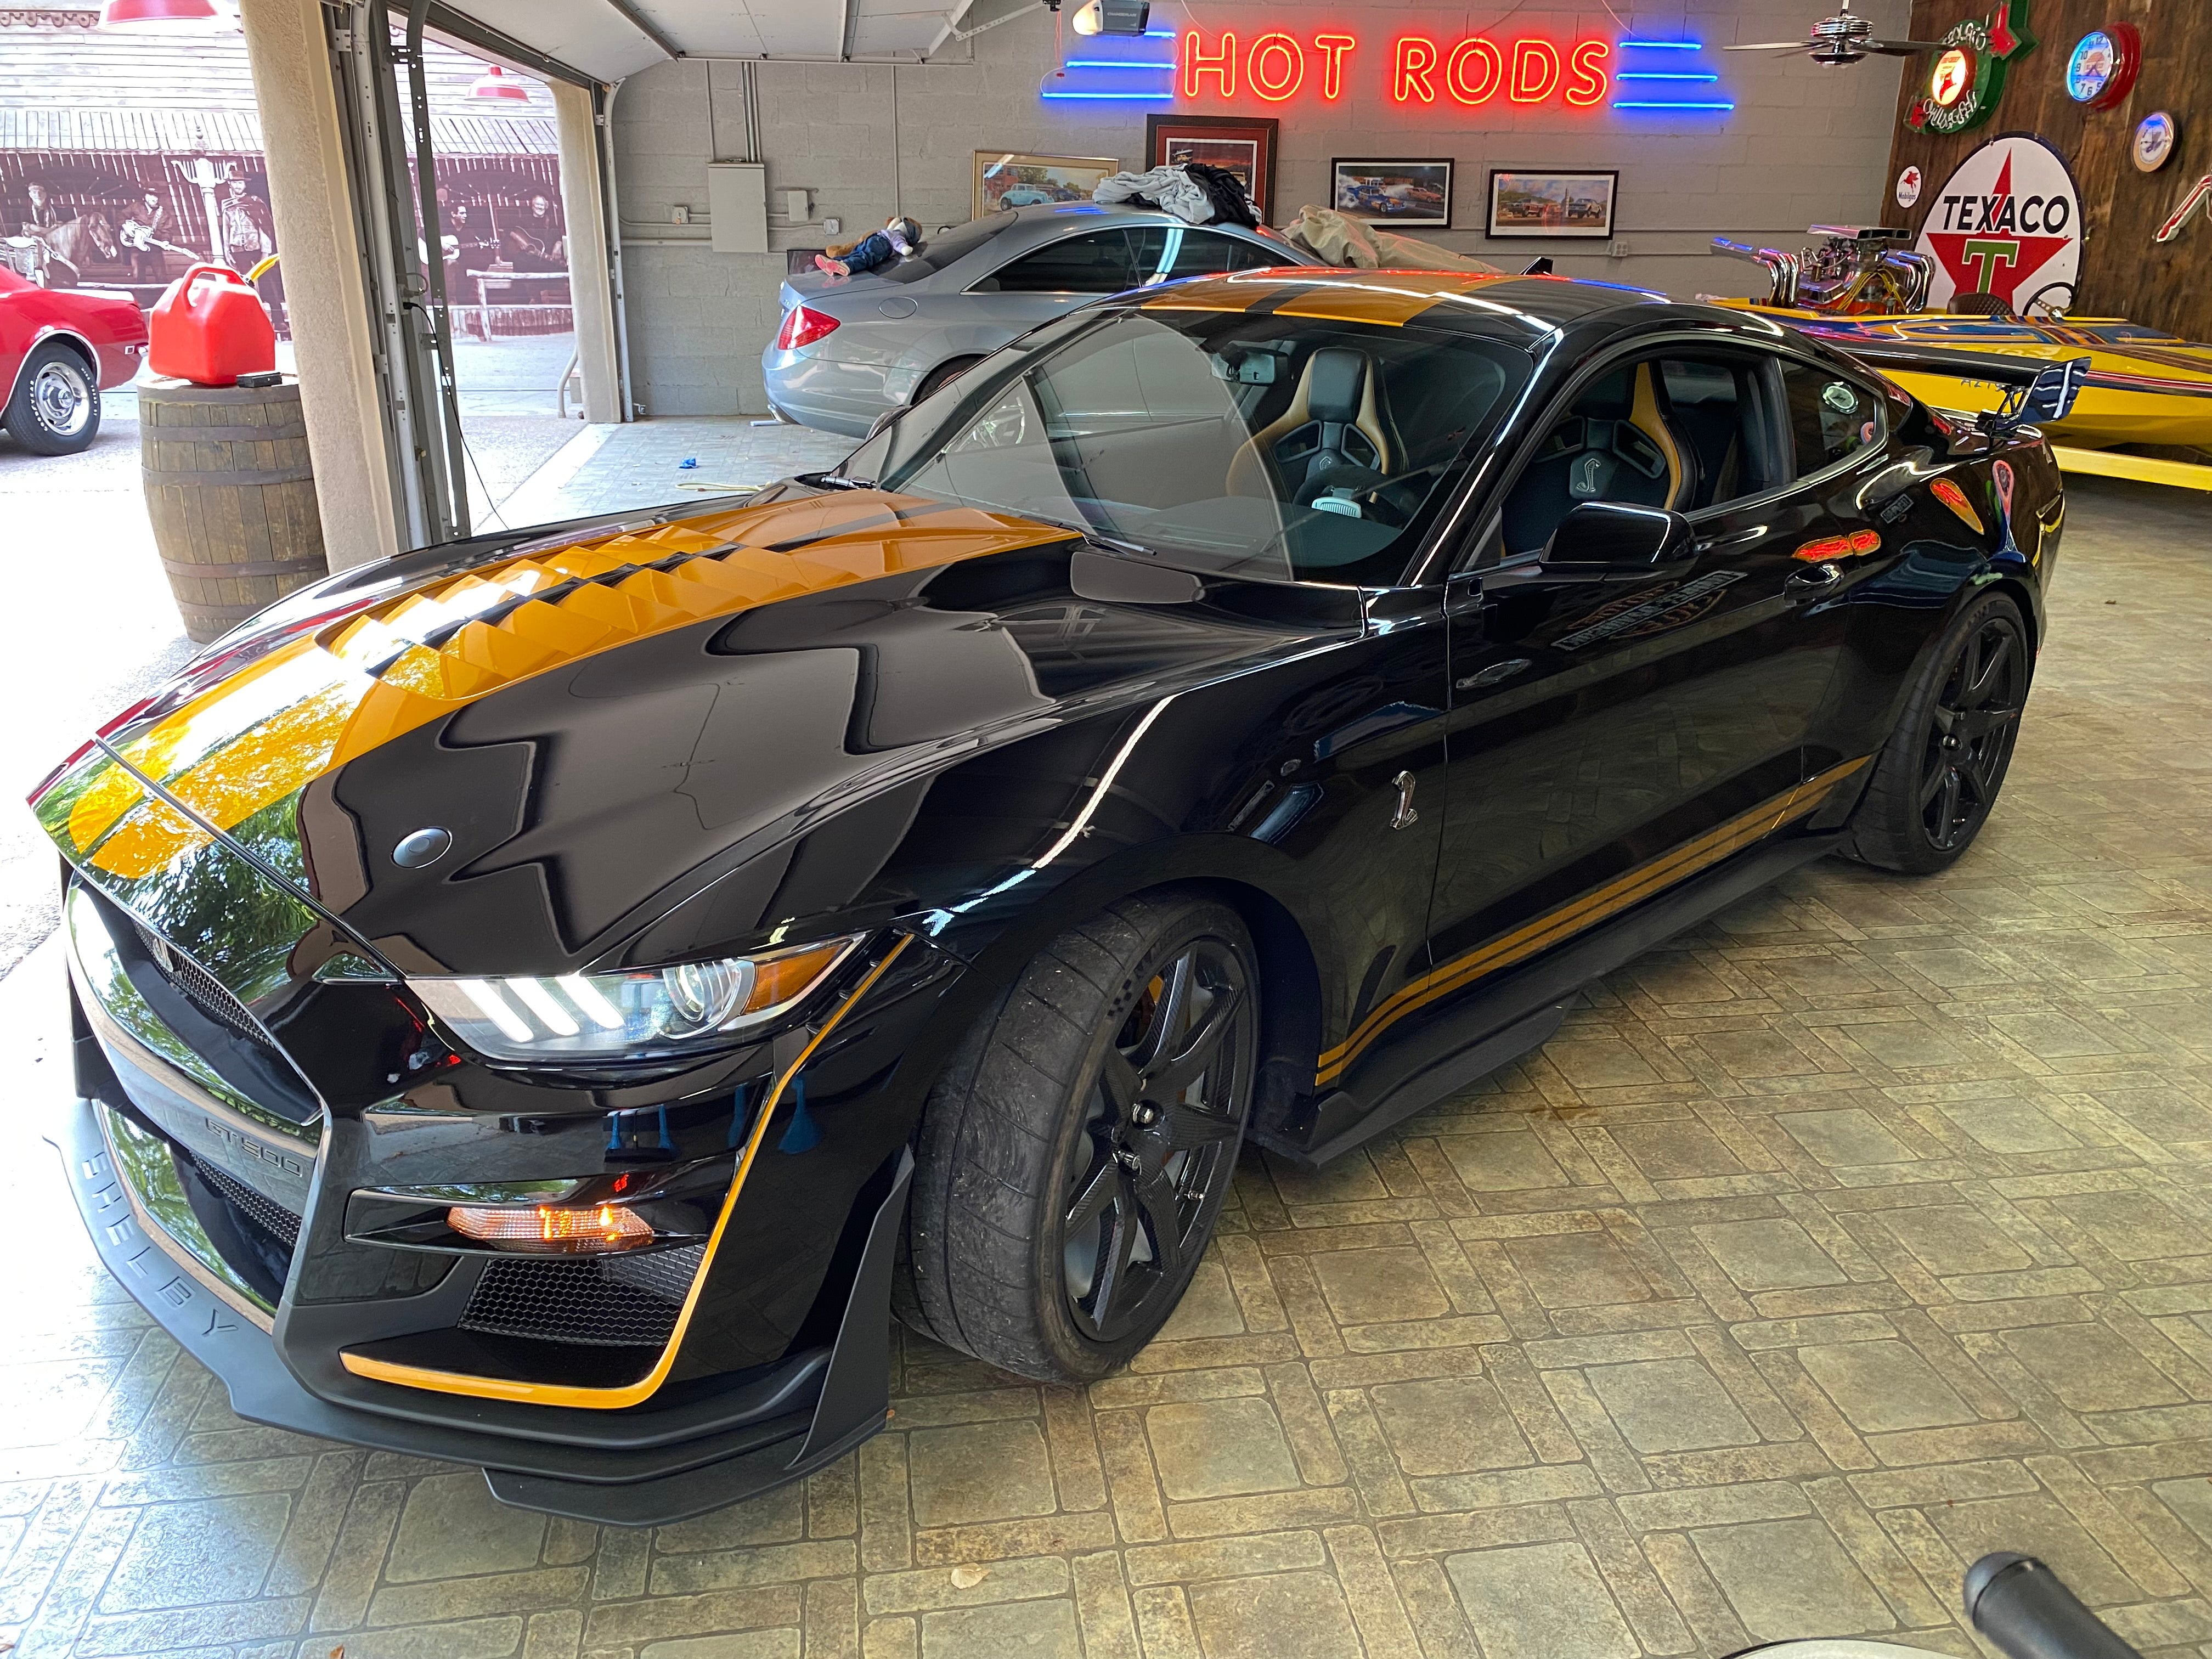 2020 Ford Mustang GT 500 (The Golden Ticket) #3168